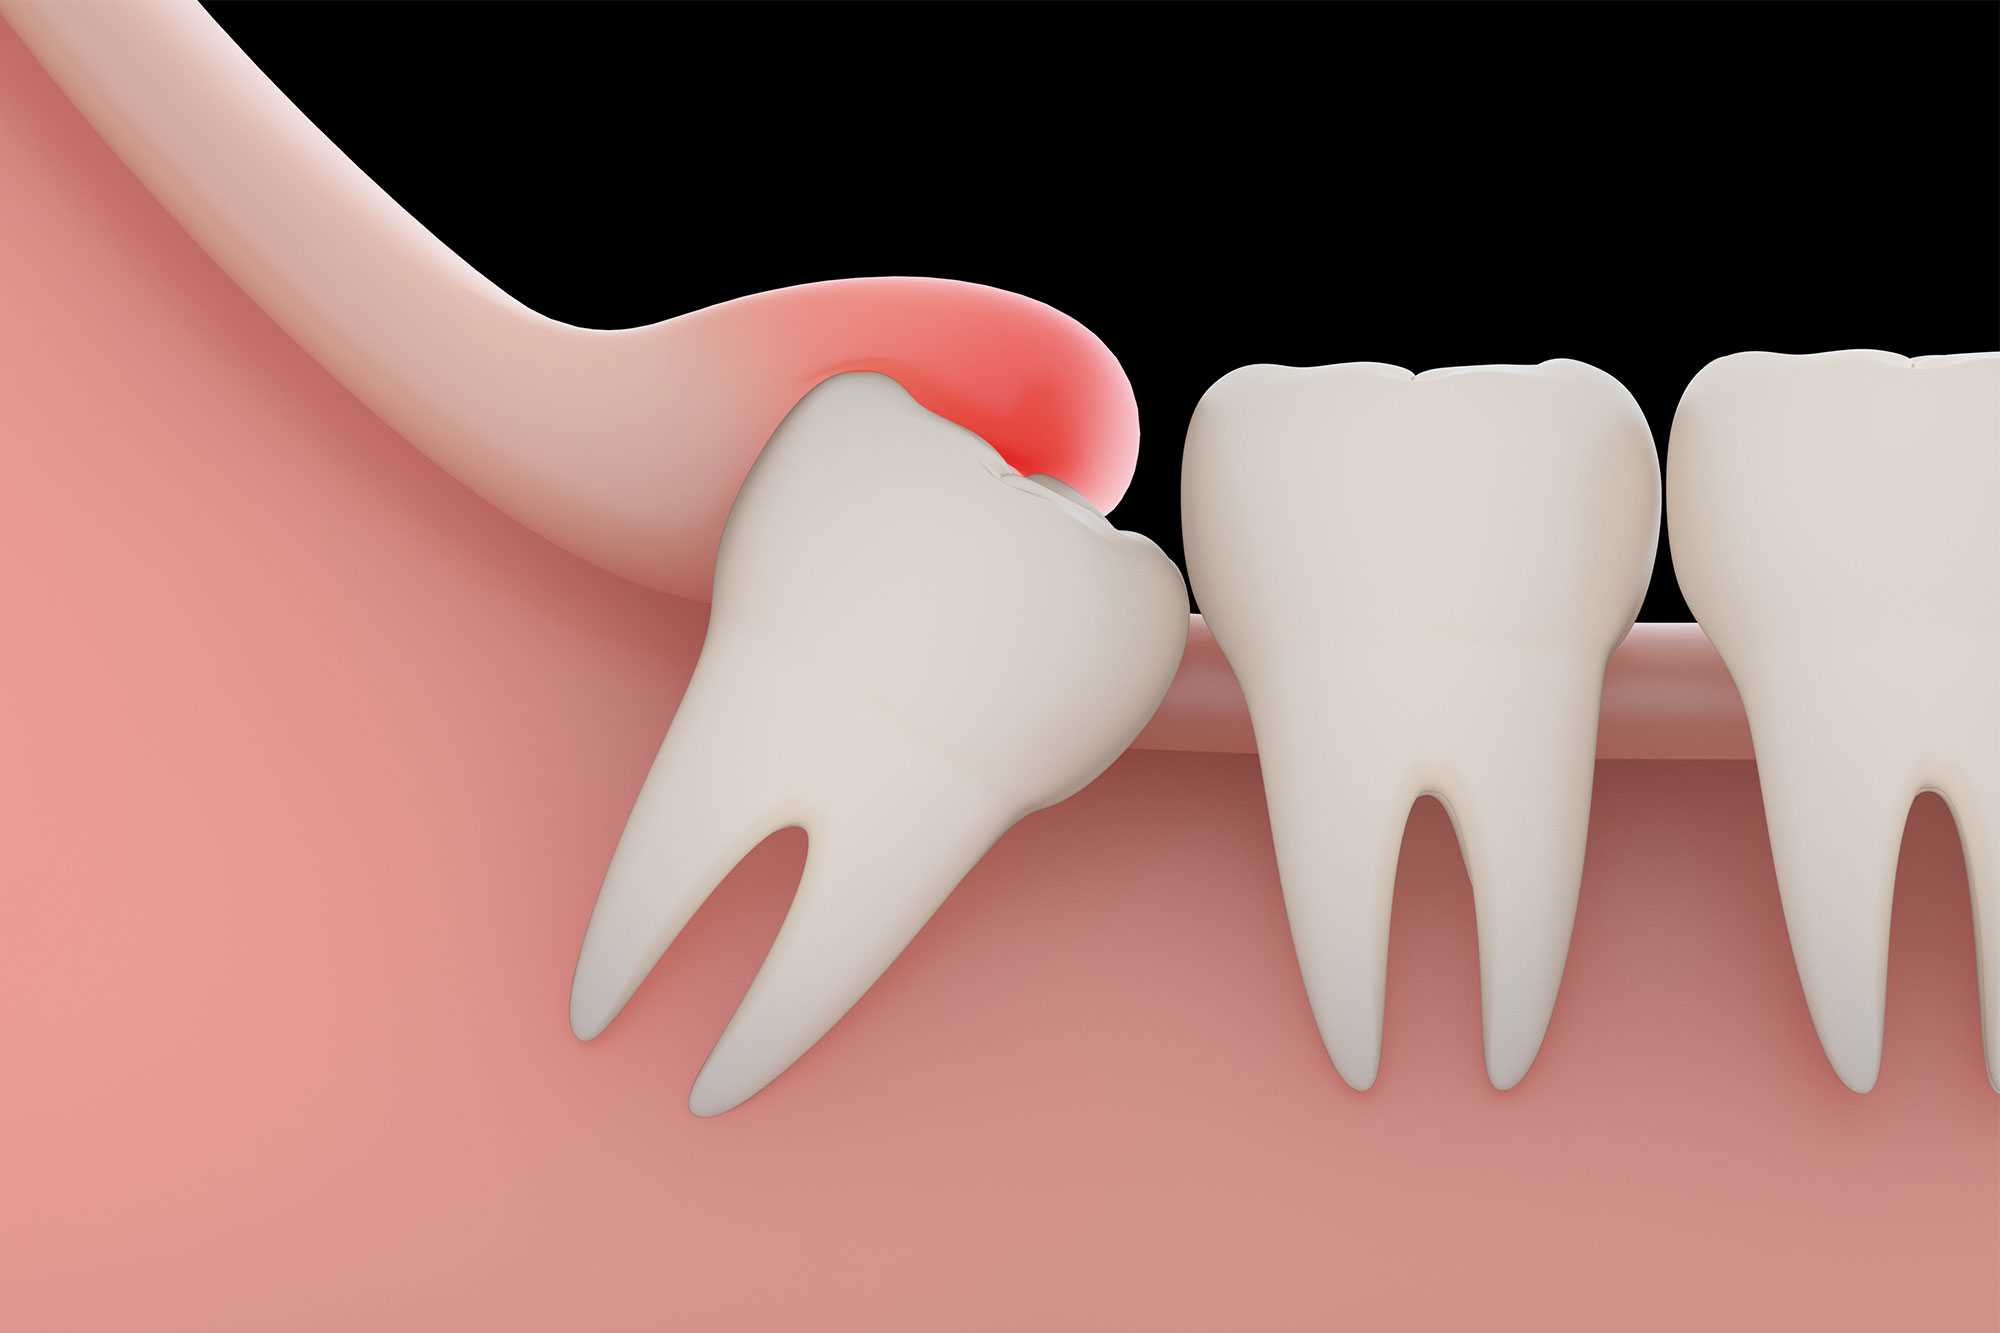 Wisdom Tooth Extraction (Removal) Procedure, Pain, Cost & Recovery